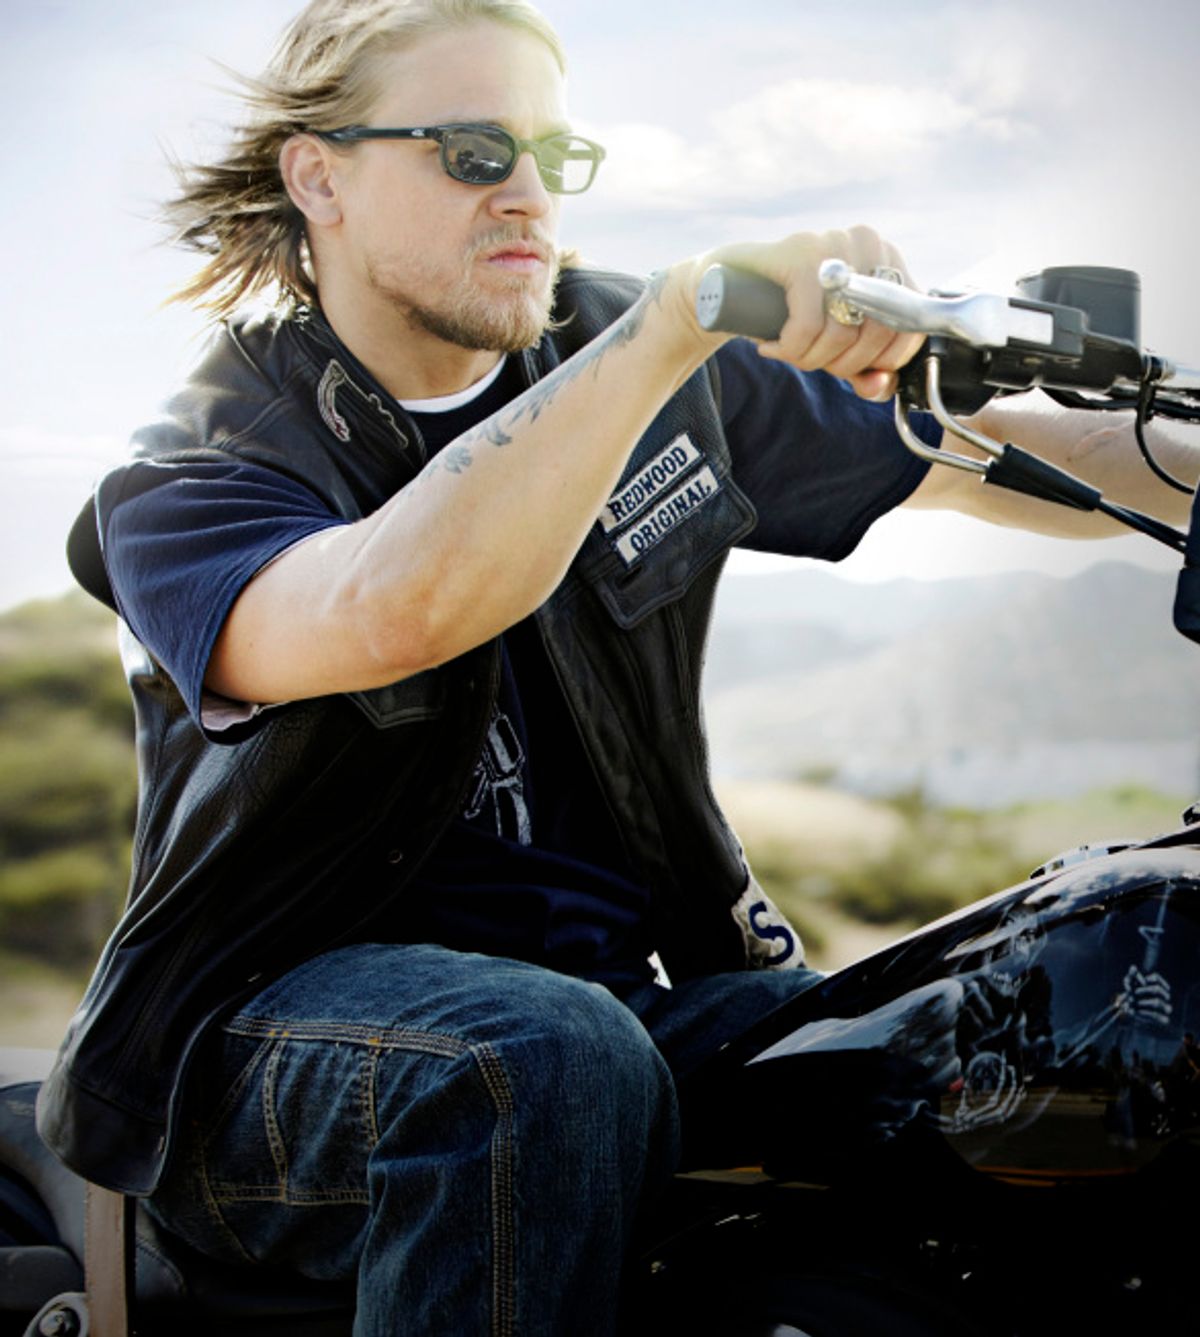 Sons of Anarchy: Badass or just bad?